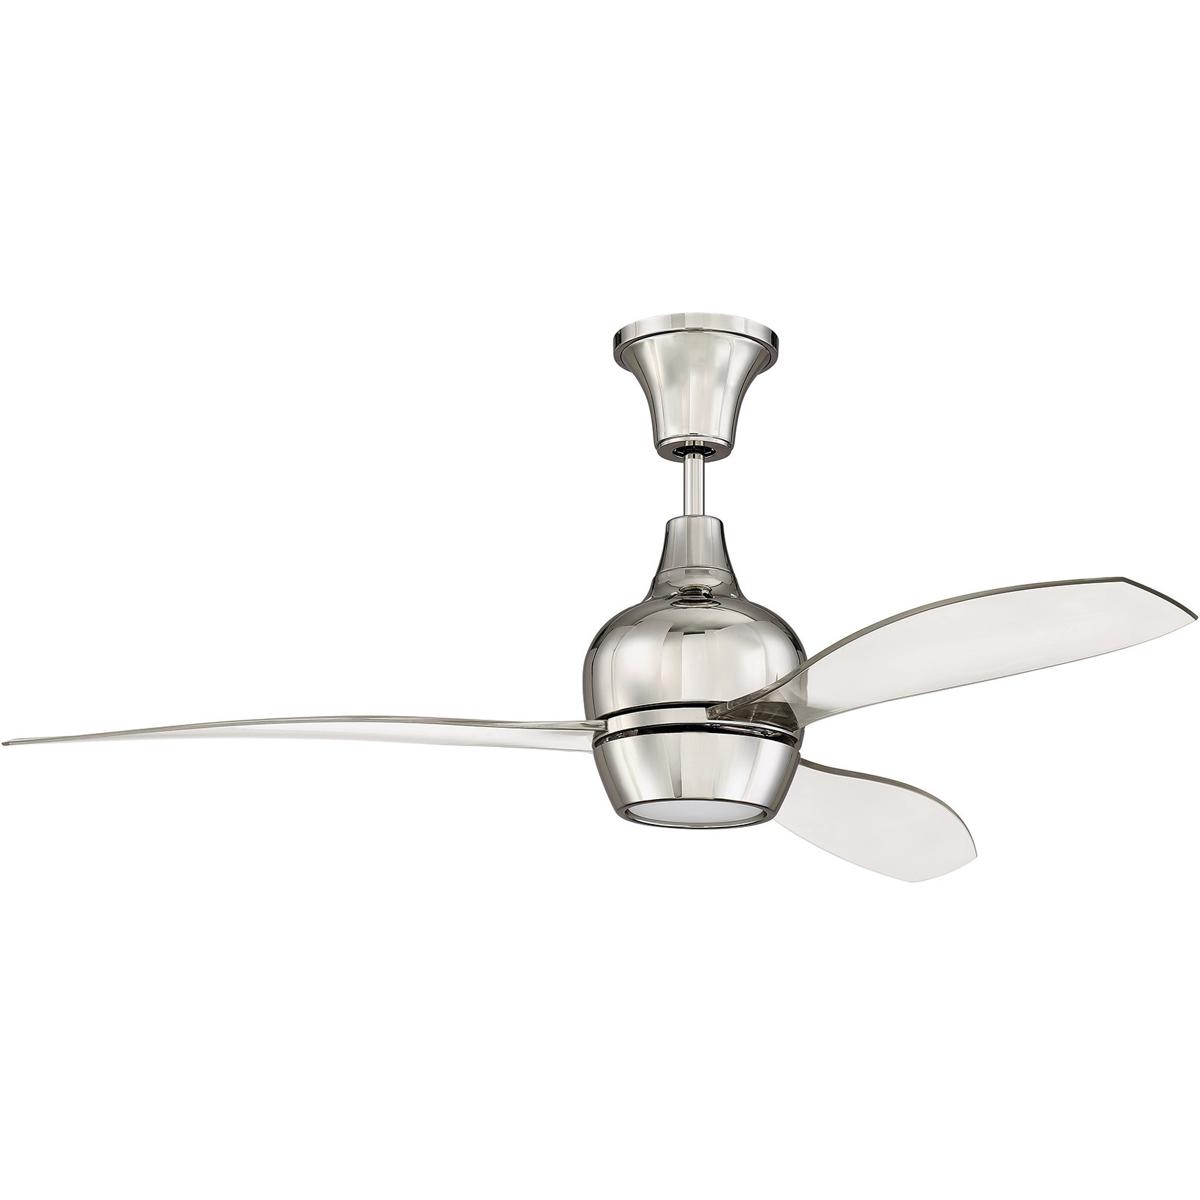 Craftmade Brd52pln3 Uci Bordeaux 52 Inch Polished Nickel With Clear Acrylic Blades Ceiling Fan Blades Included